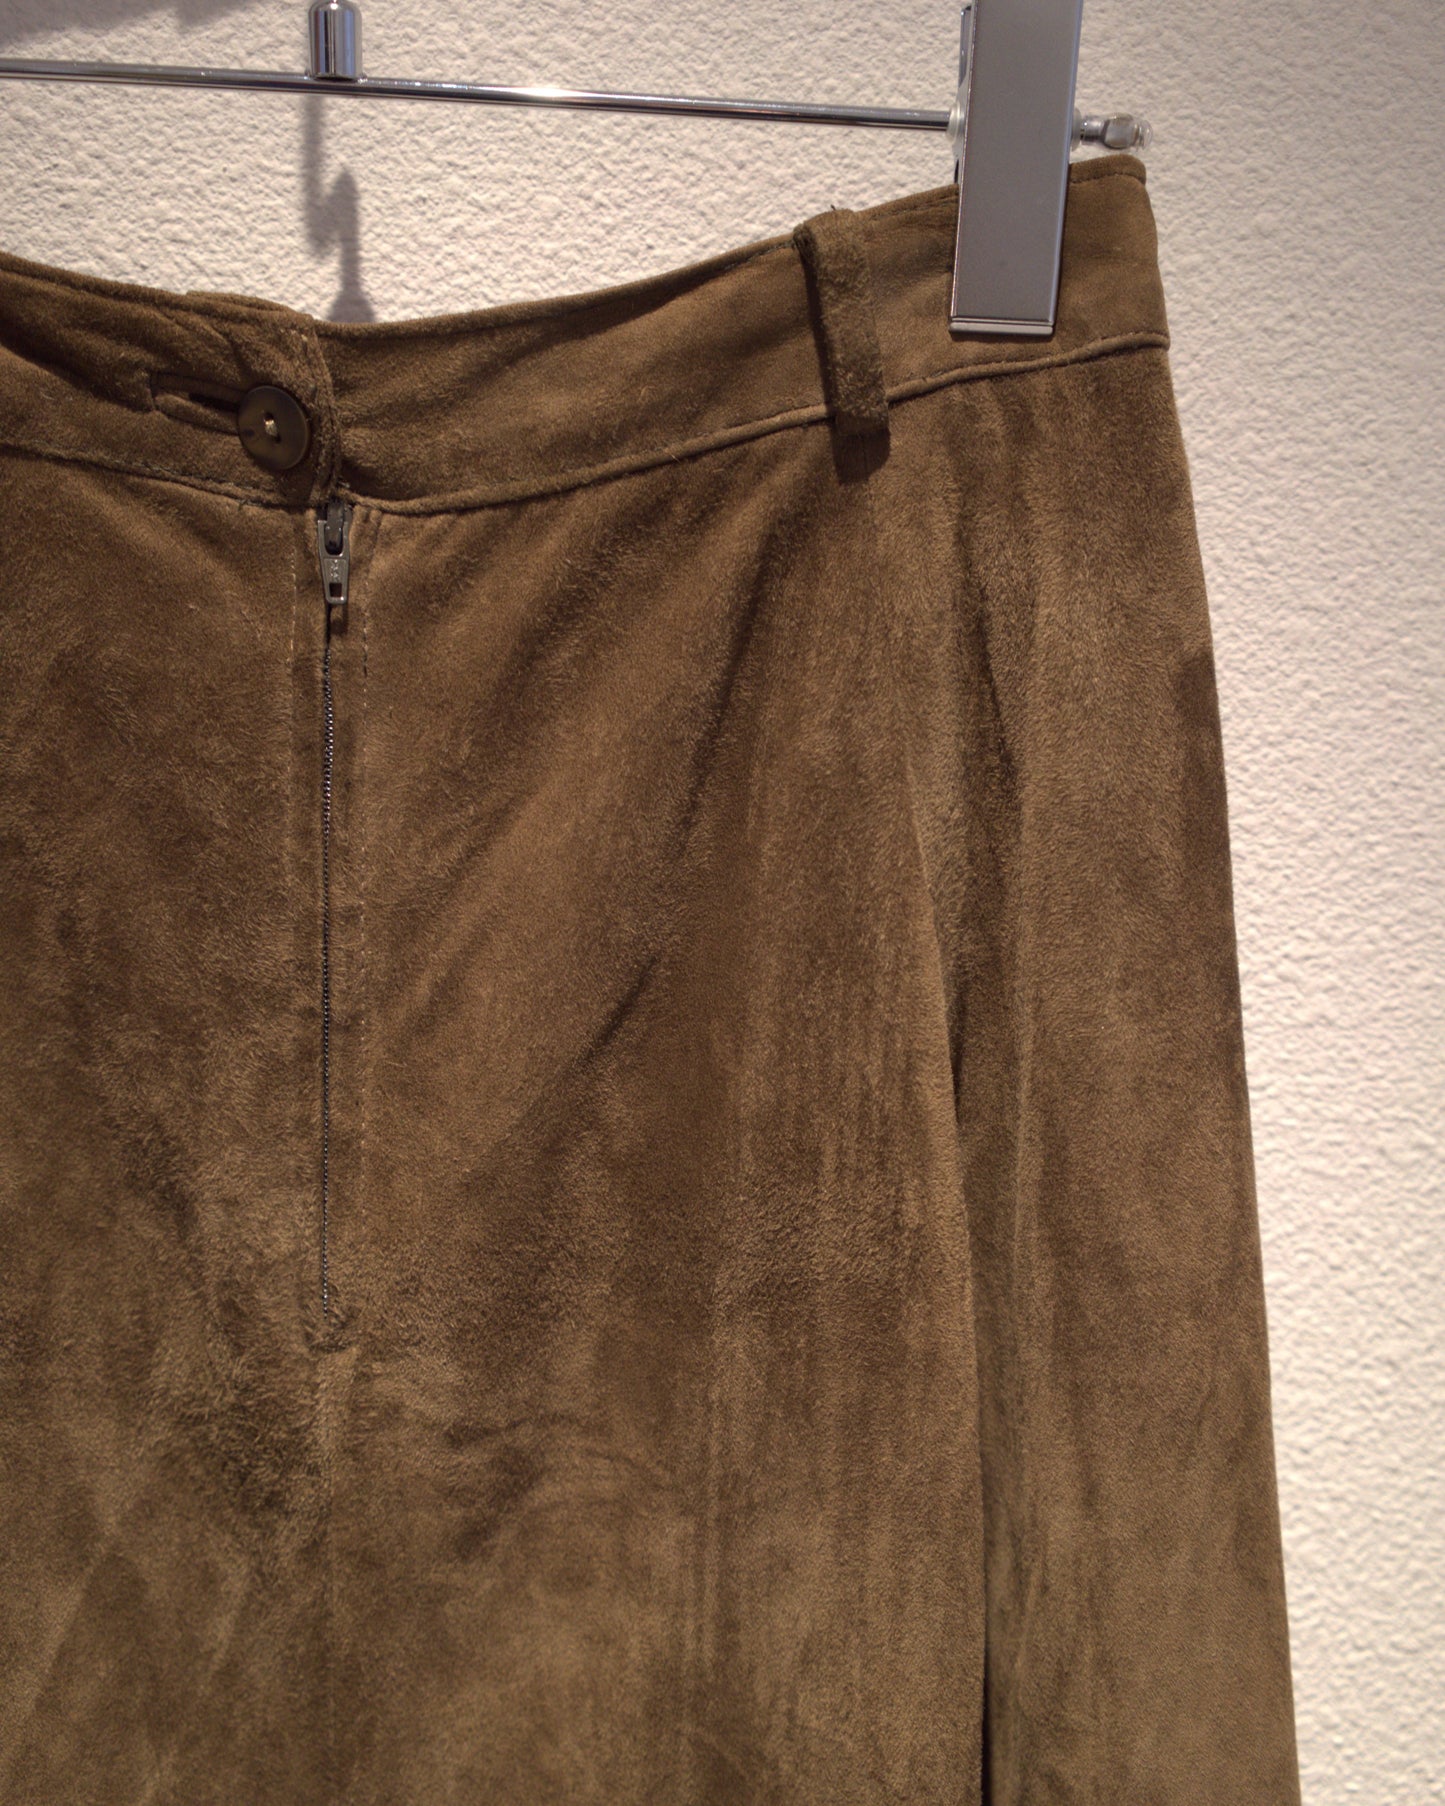 Suede leather skirt